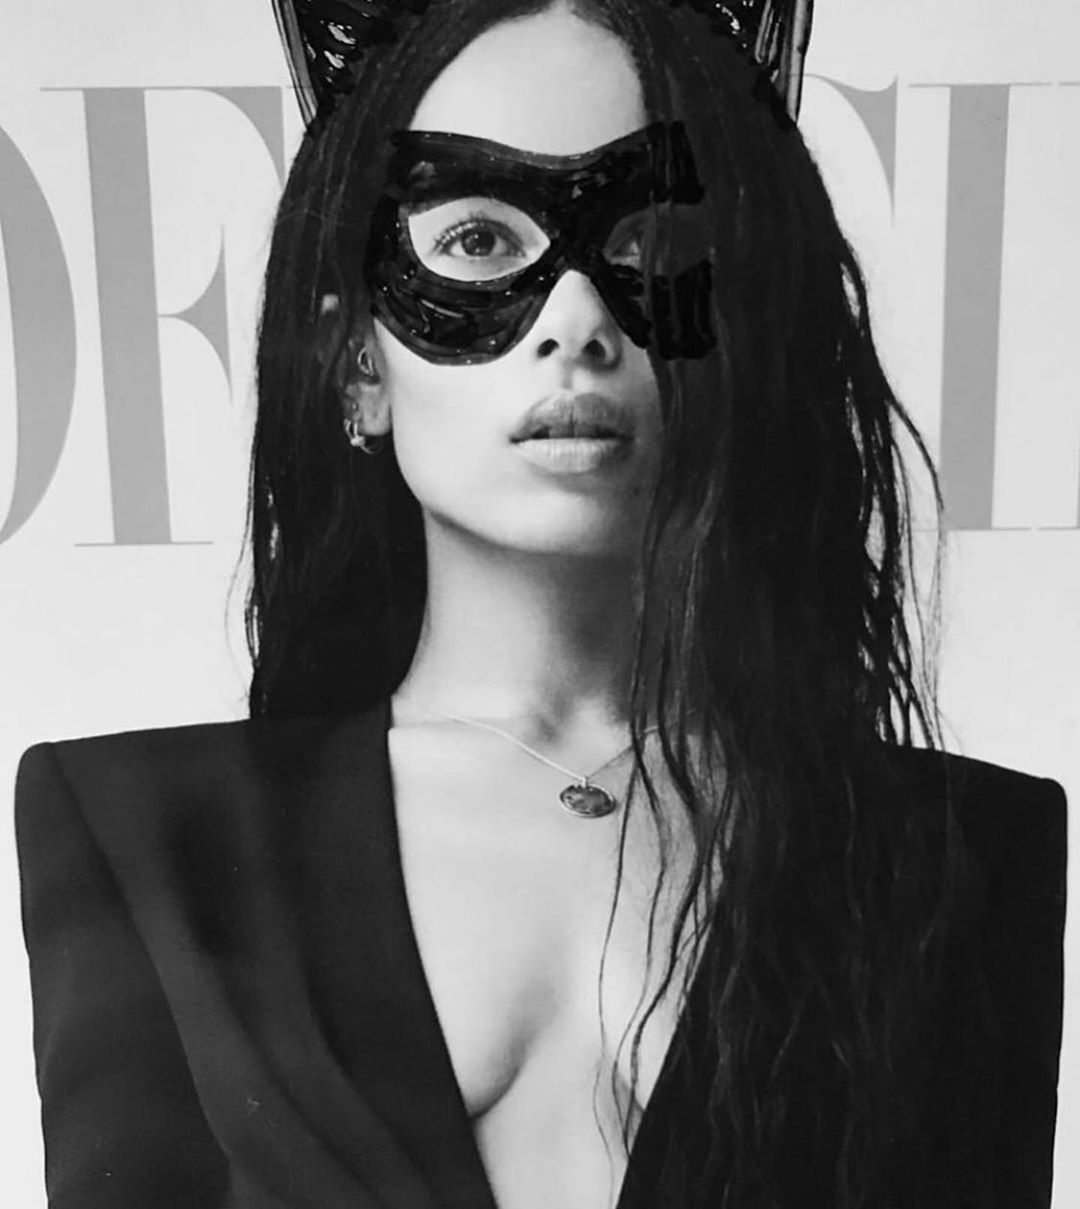 Cat woman is back! Congrats @zoeisabellakravitz ... Meow girl! 😻